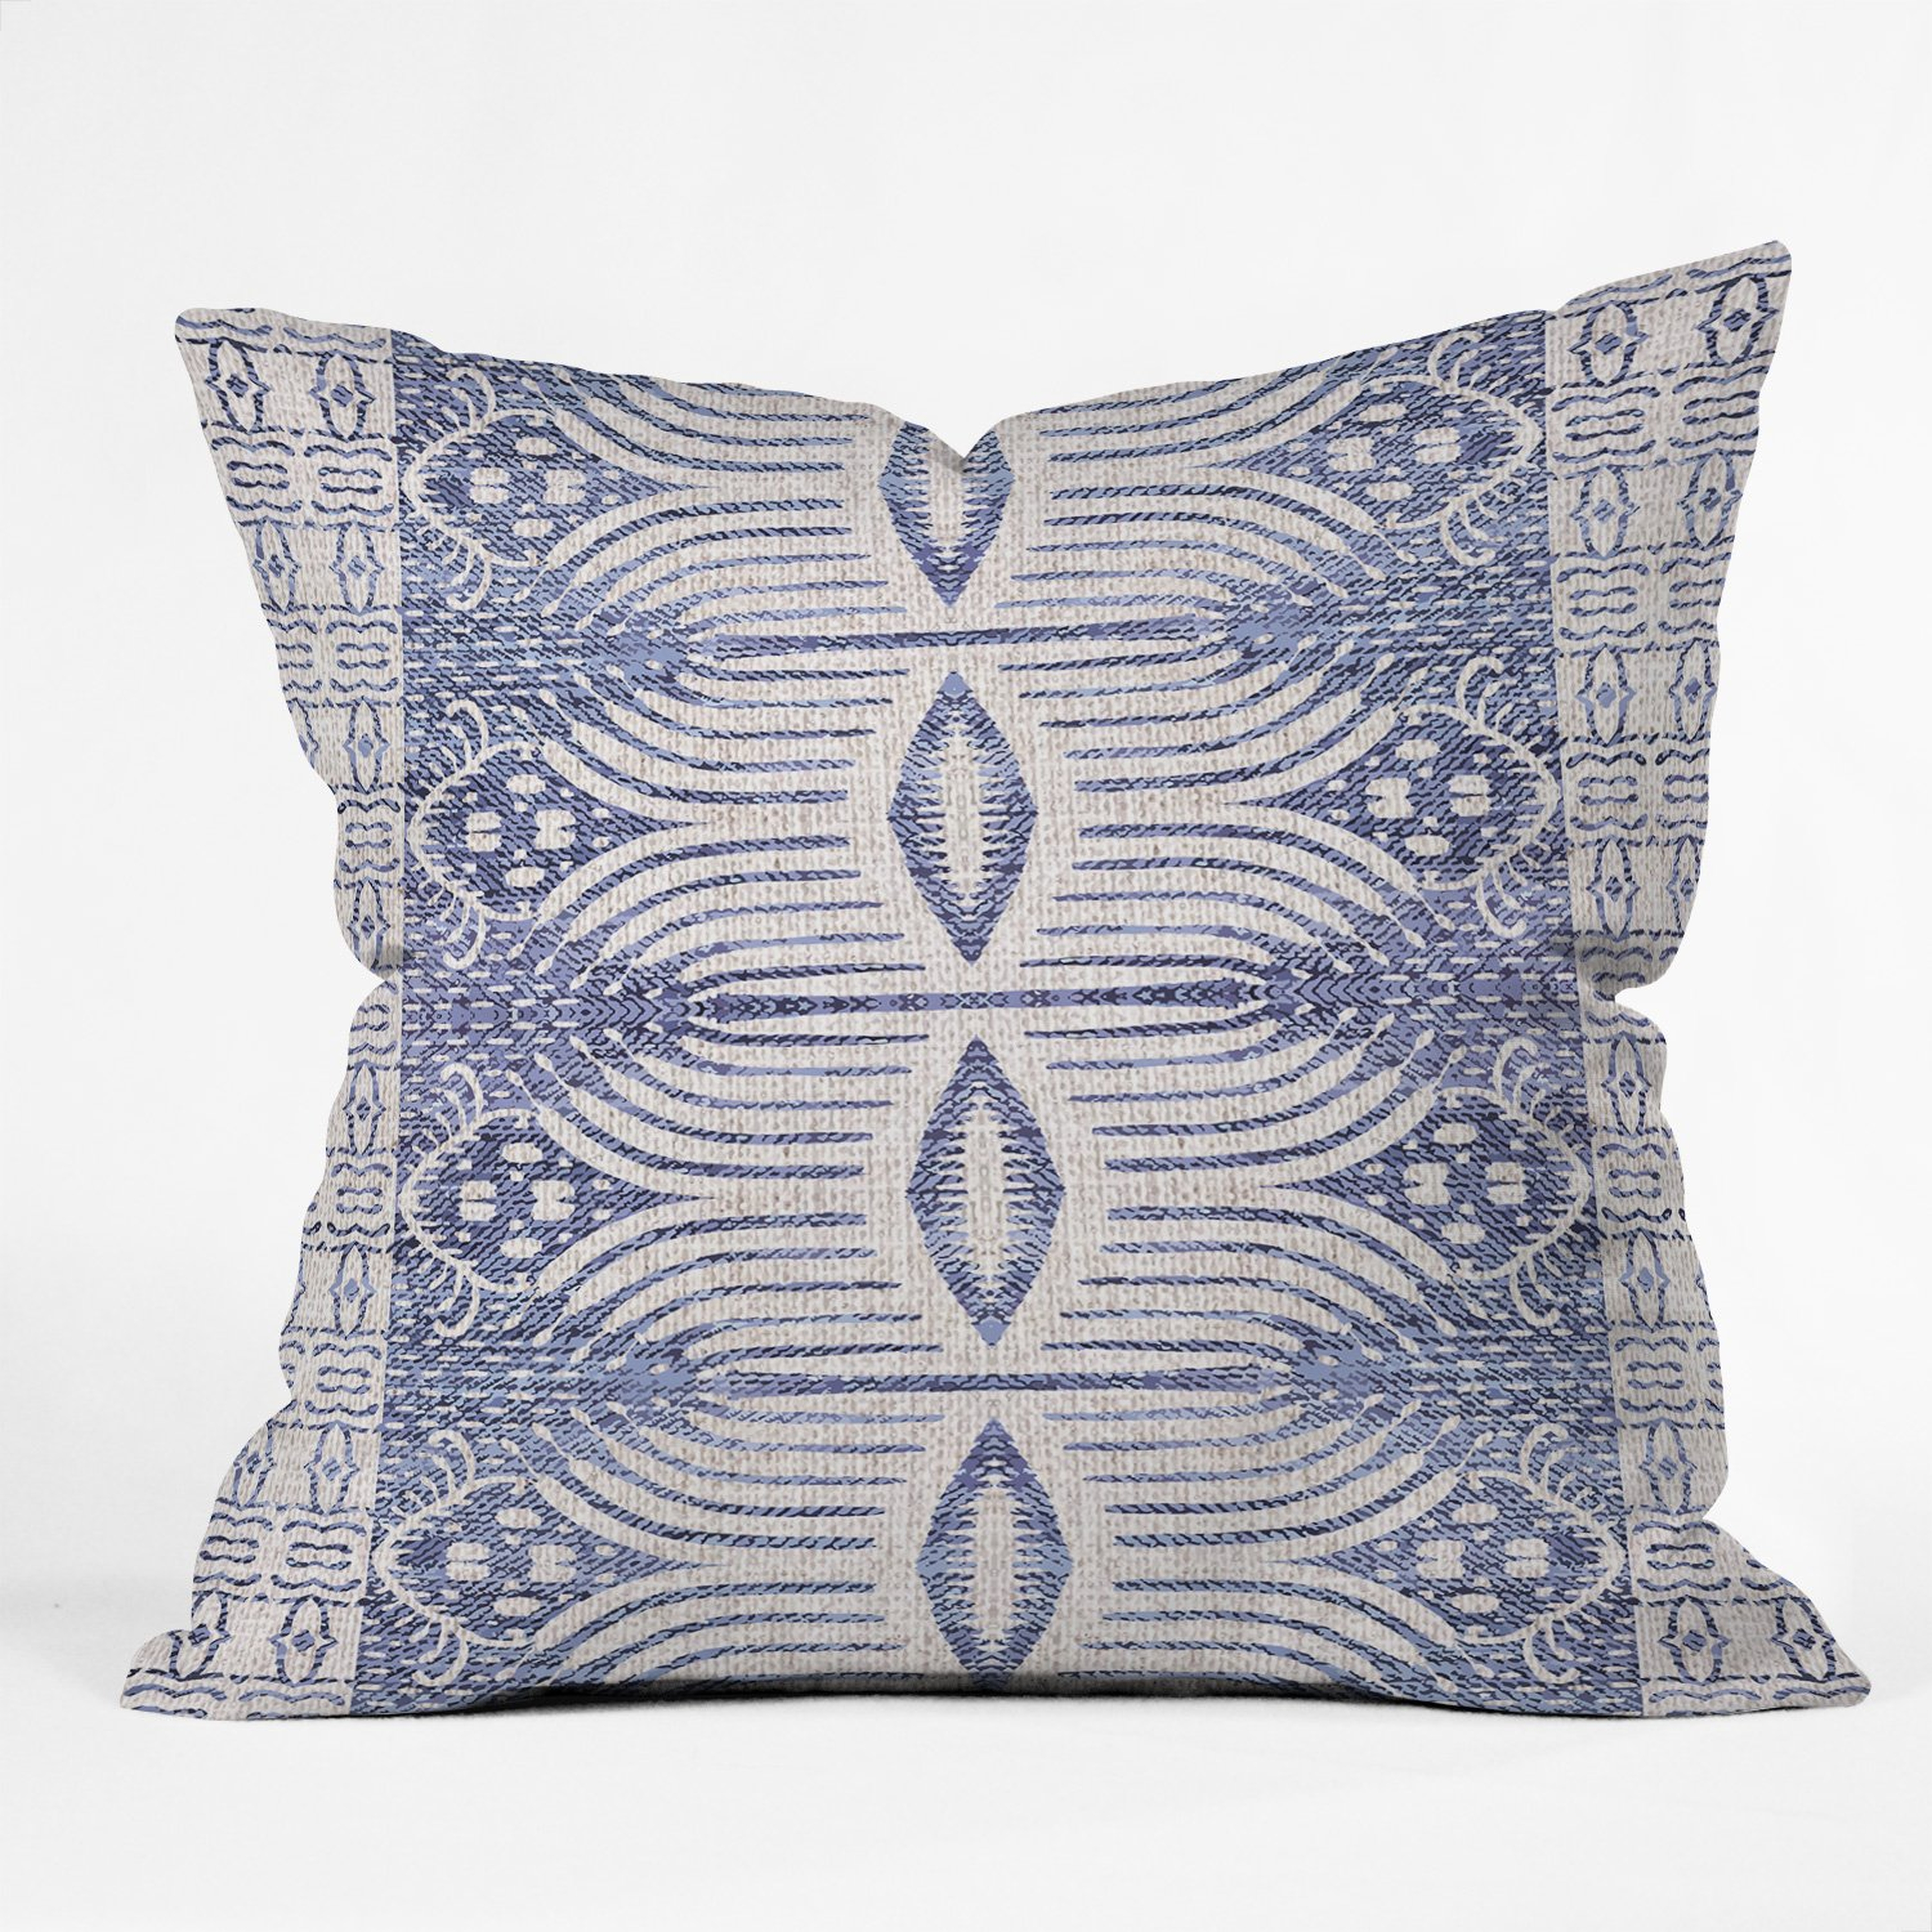 FRENCH LINEN TRIBAL IKAT Pillow with Insert - Wander Print Co.